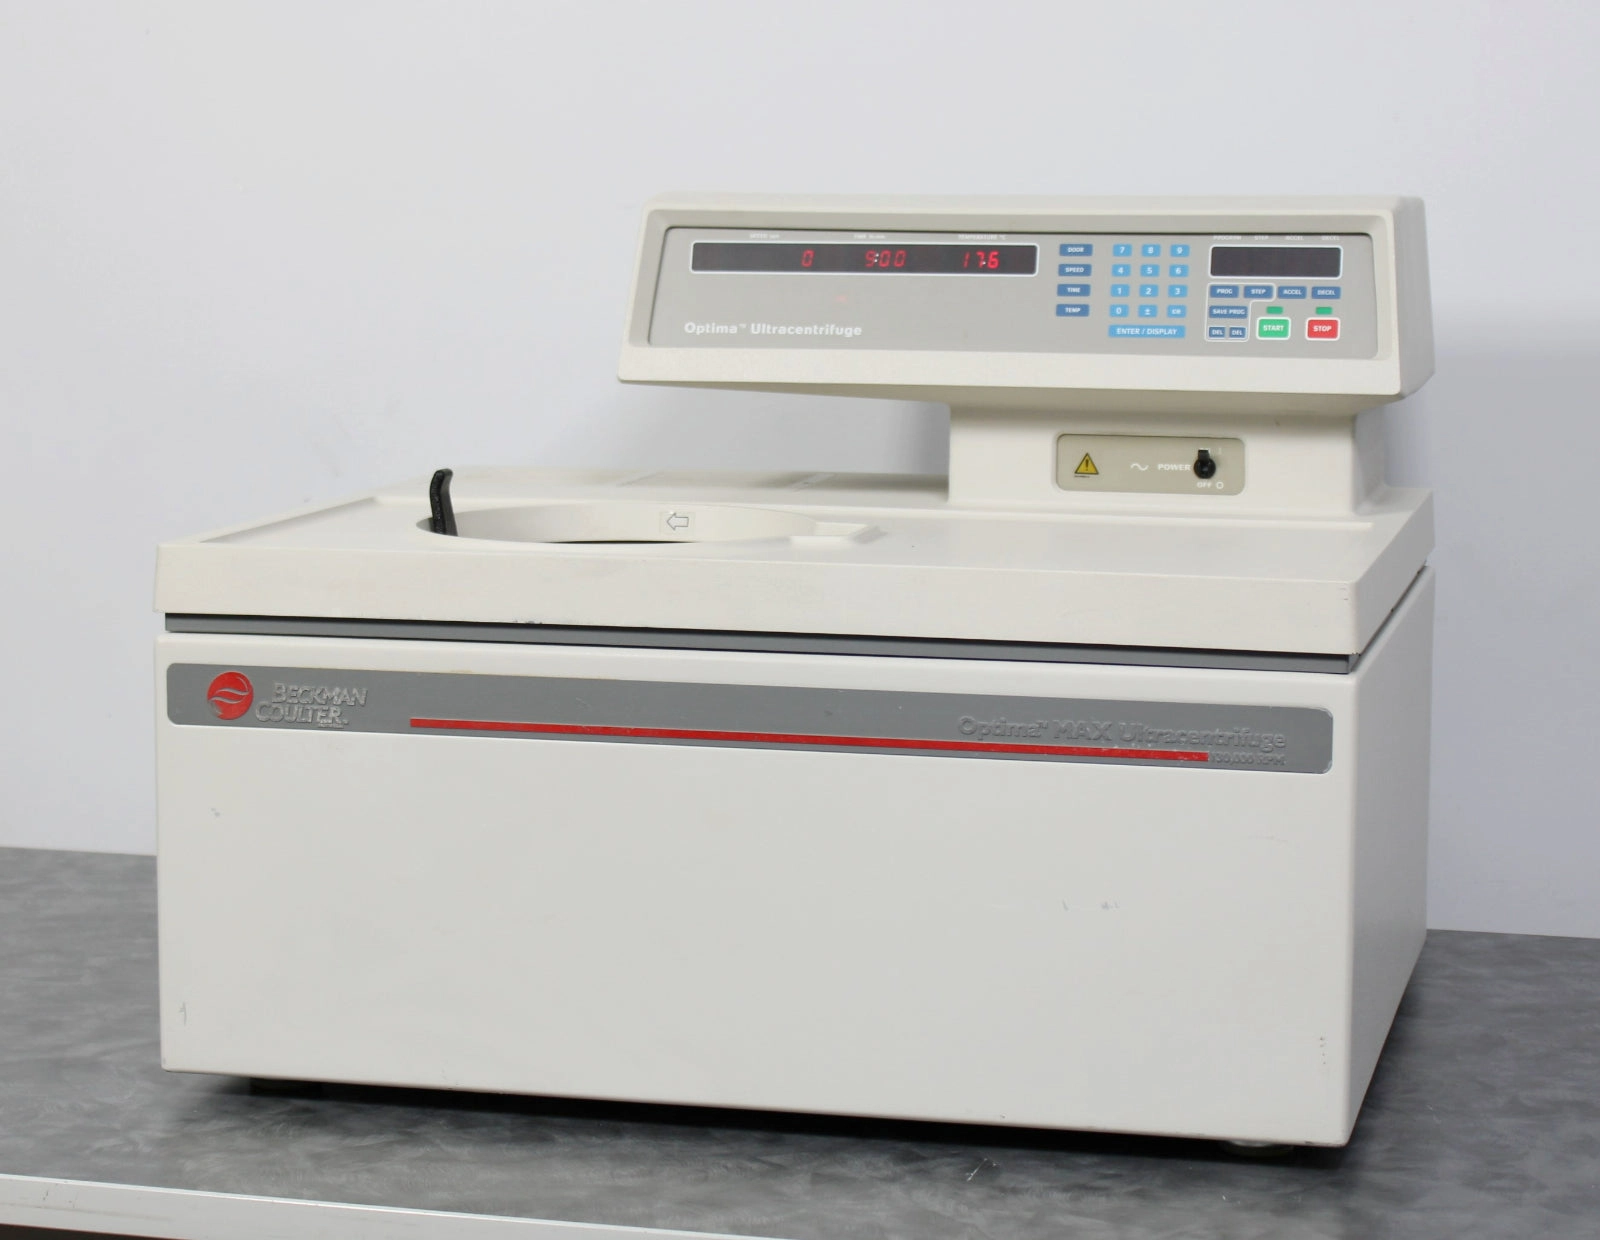 Beckman Coulter Optima MAX 130K Refrigerated Benchtop Ultracentrifuge 364301